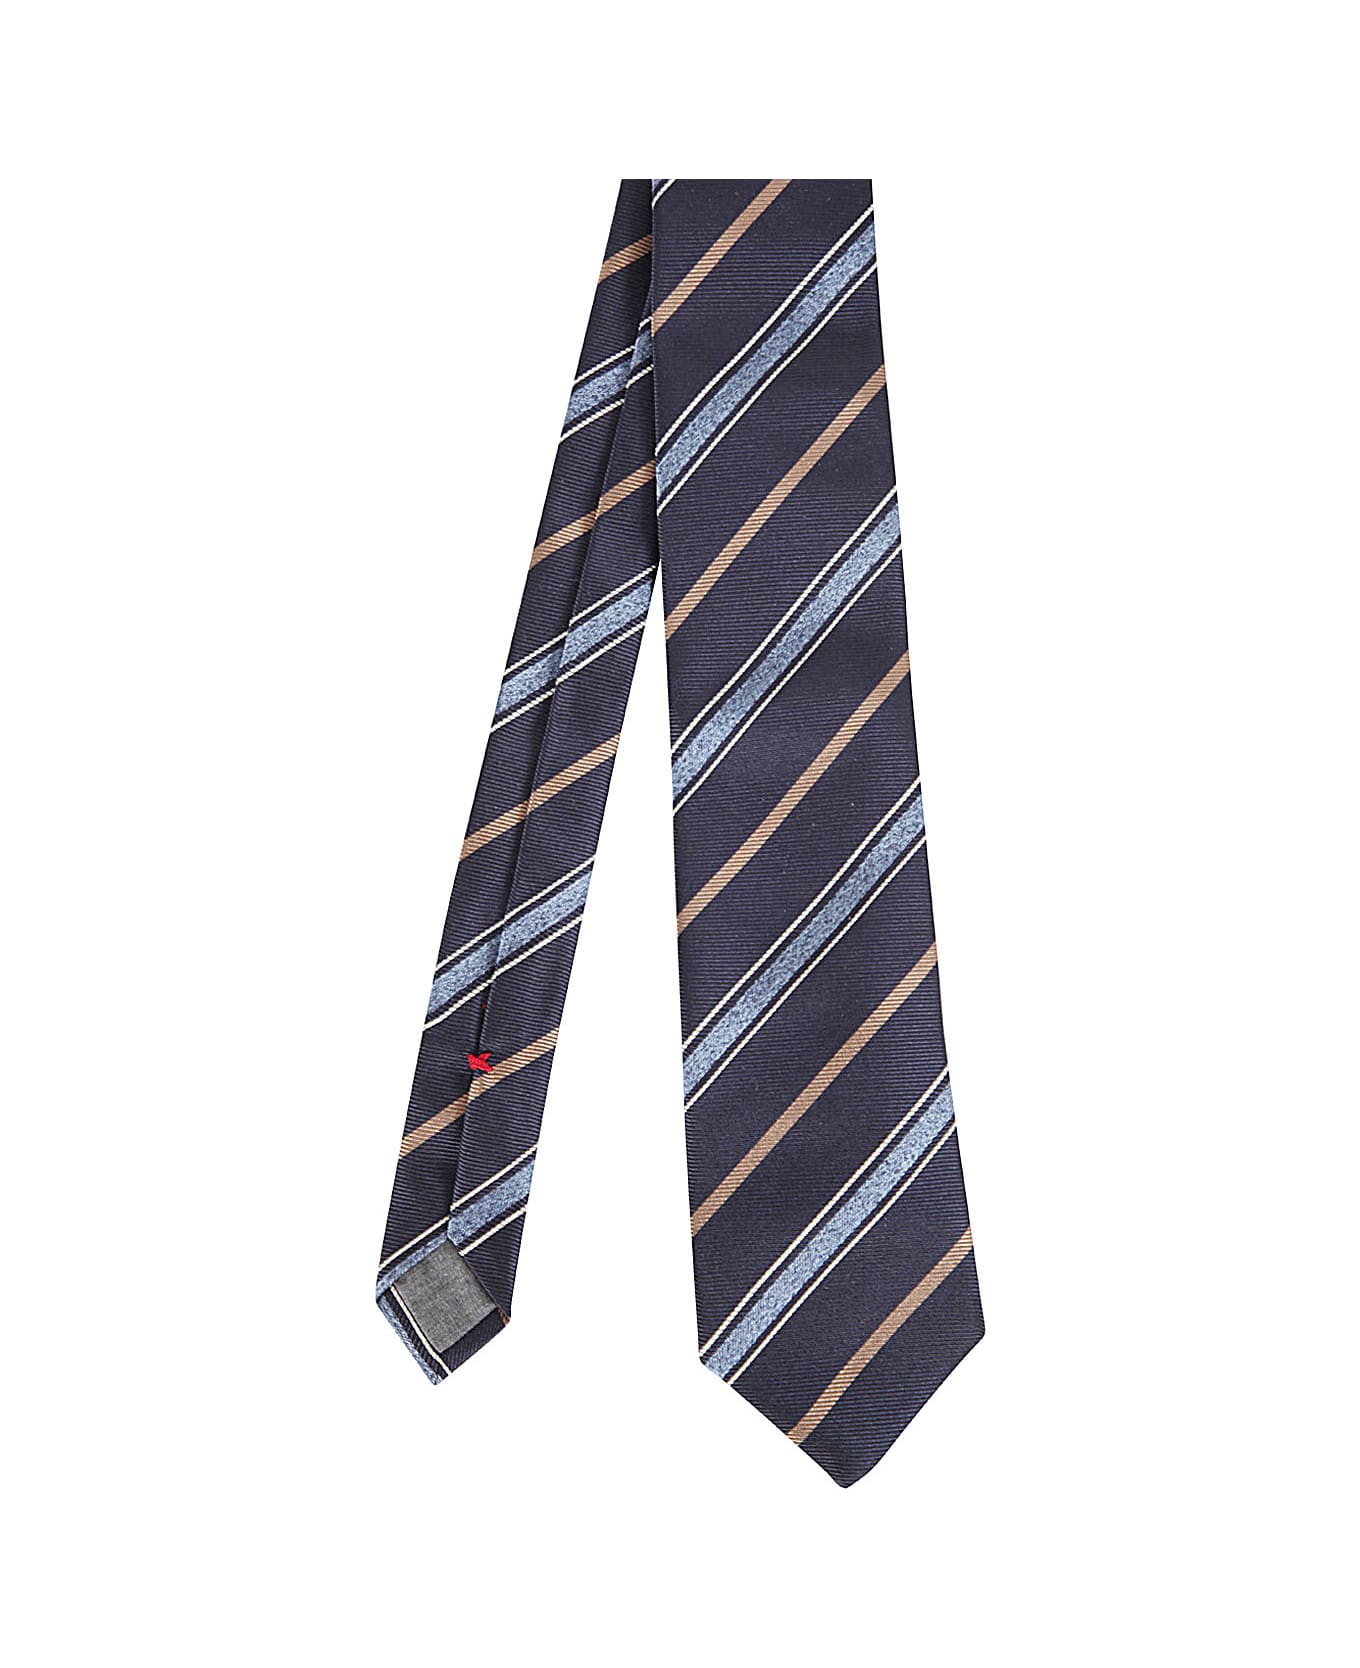 Brunello Cucinelli Tie - to chat with us